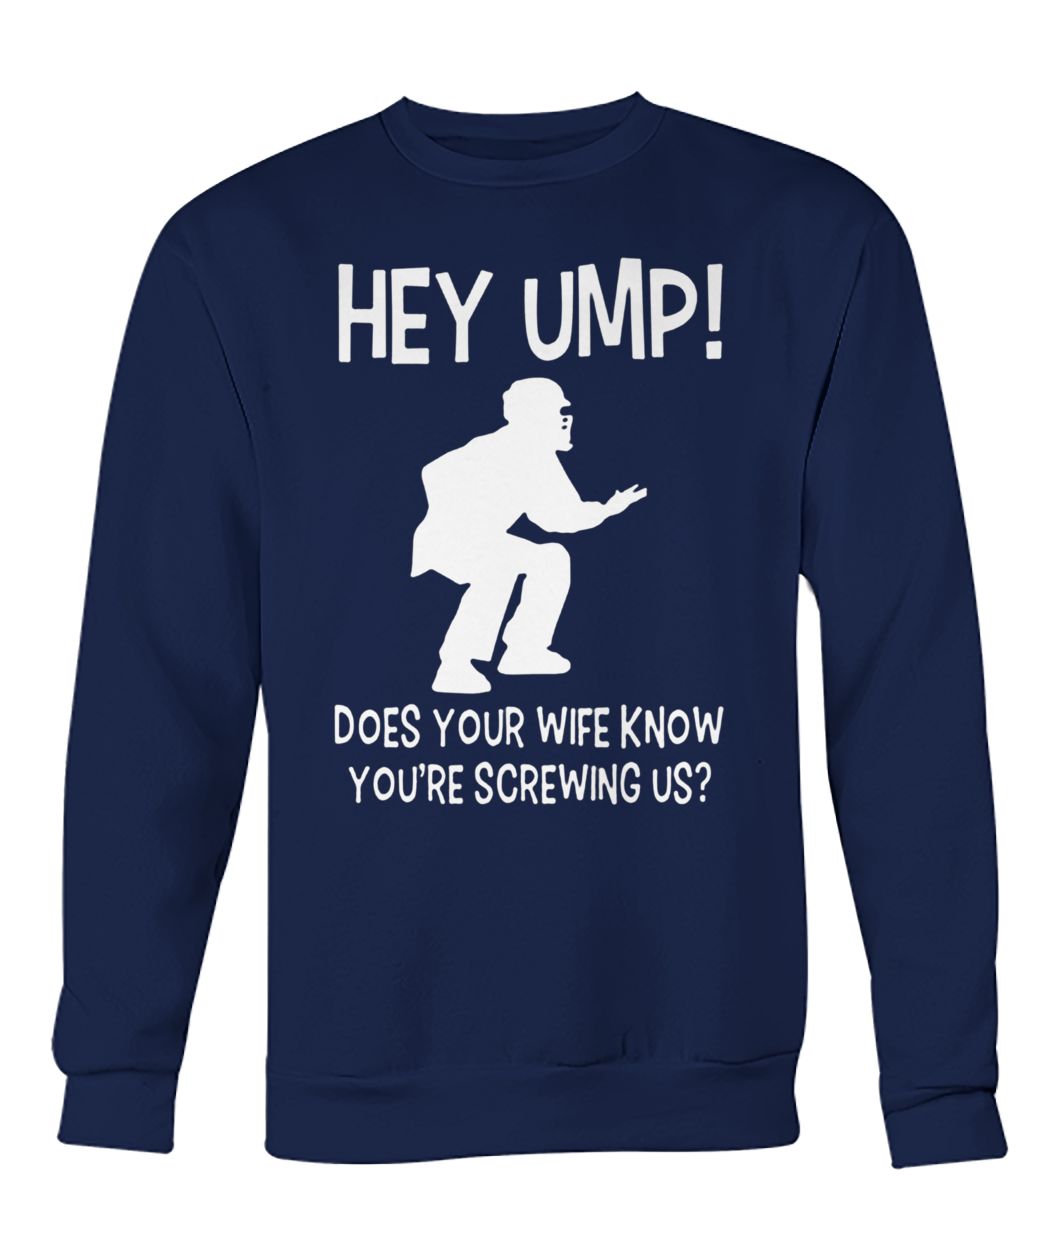 Hey ump does your wife know you're screwing us crew neck sweatshirt